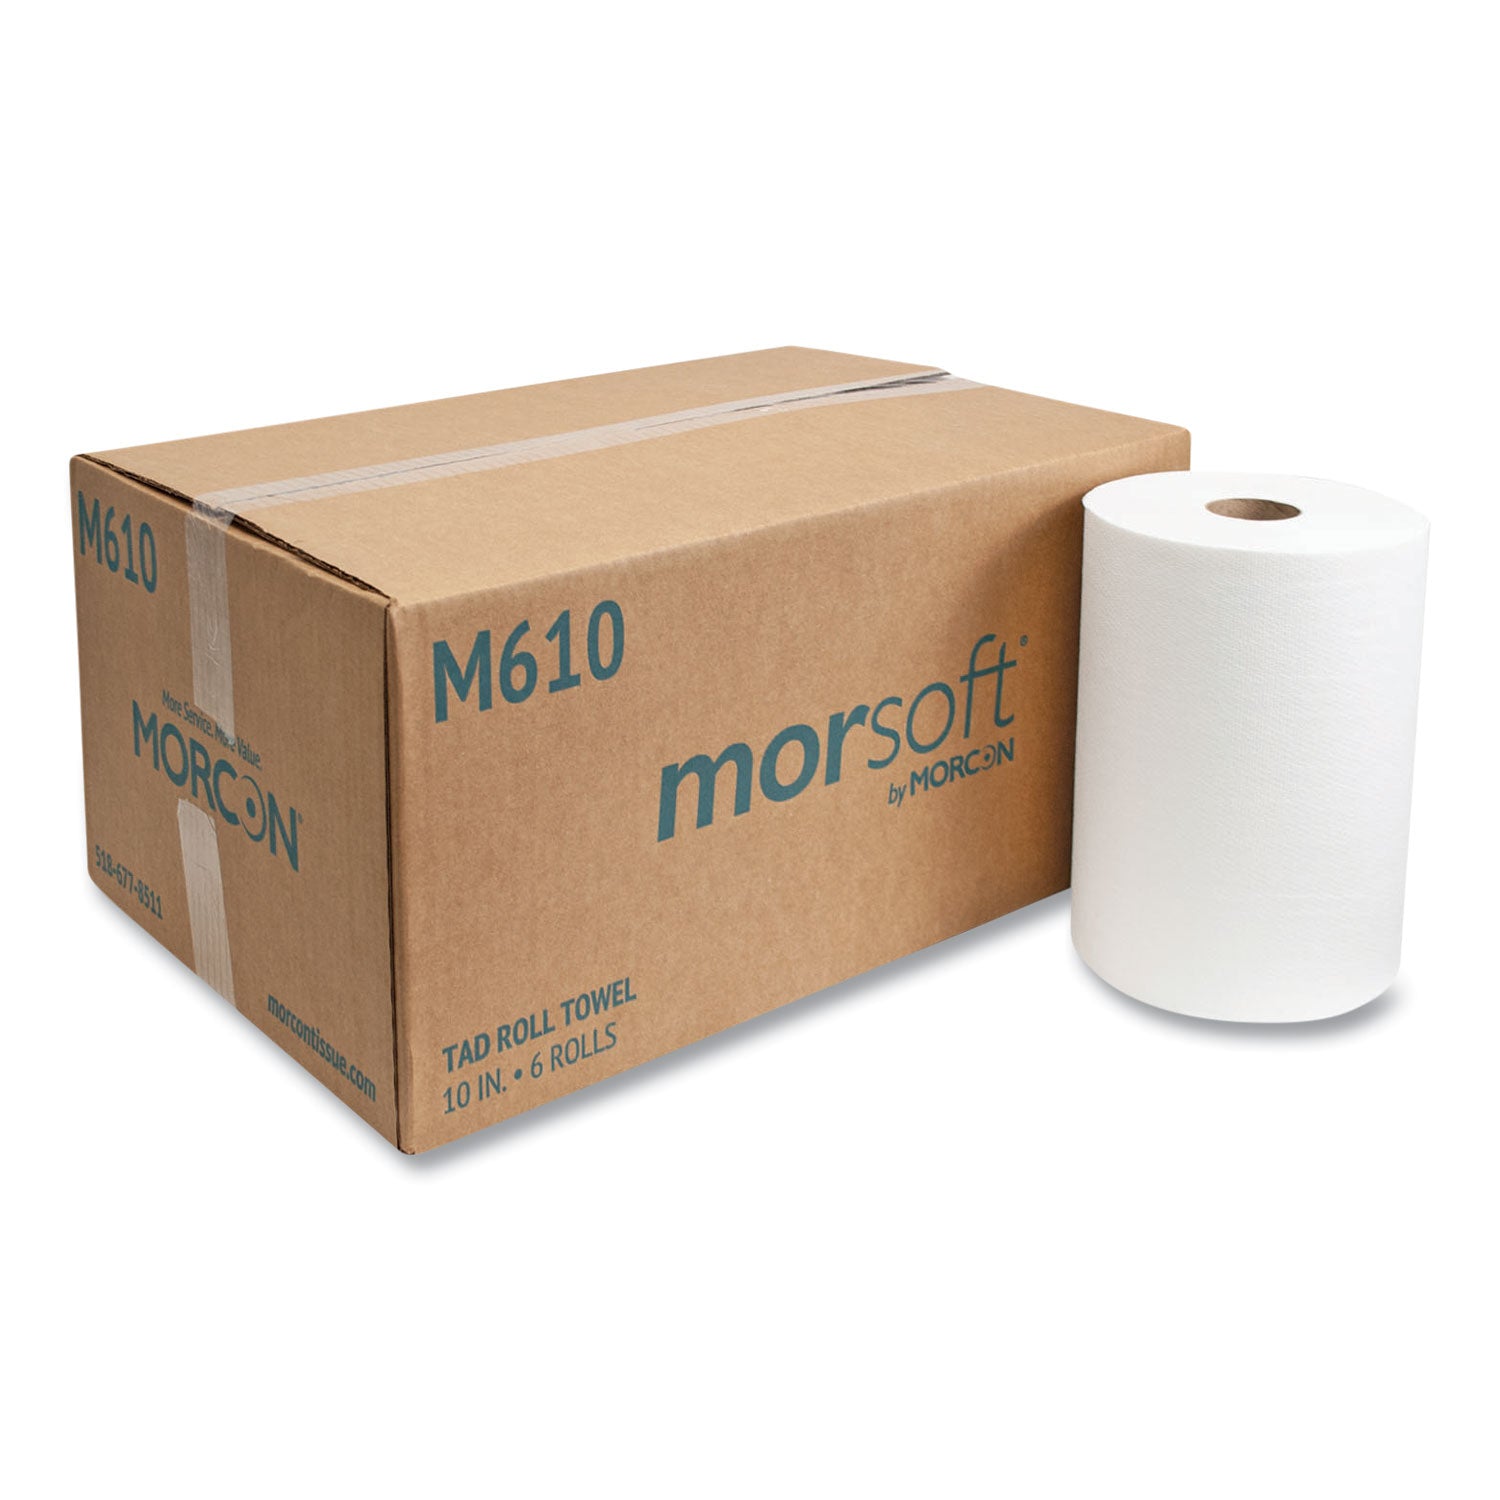 10-inch-tad-roll-towels-1-ply-10-x-500-ft-white-6-rolls-carton_morm610 - 1